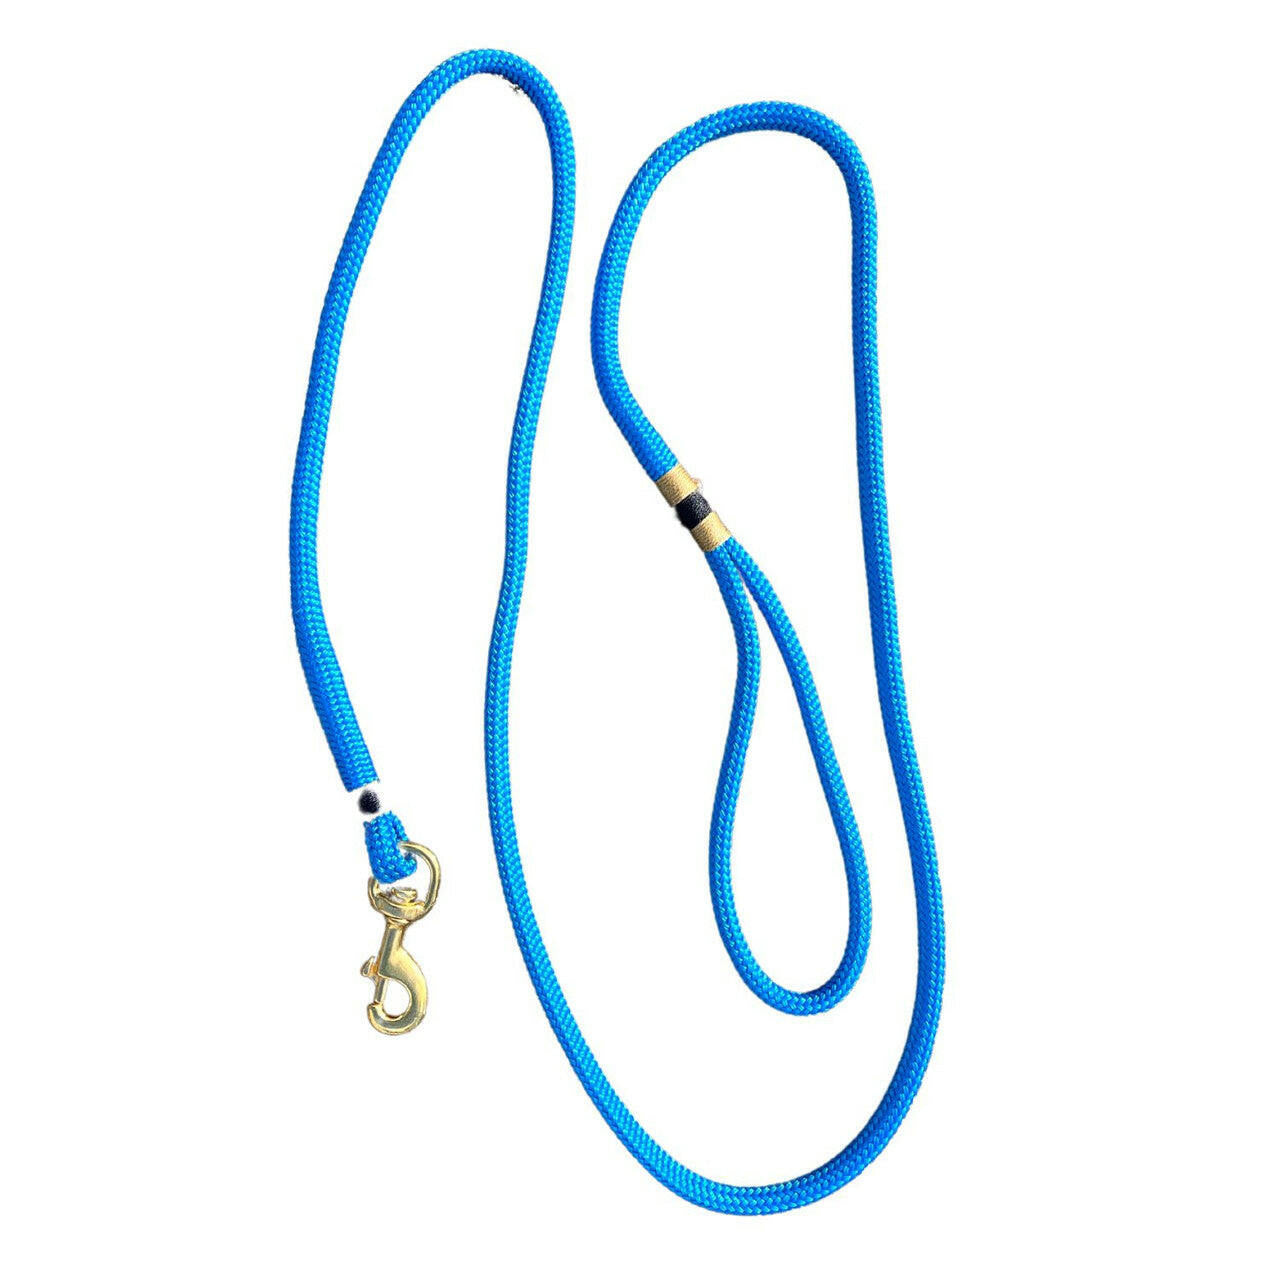 Nautical Rope Dog Leash, Authentic Yacht Braid Pet Leashes New England Trading Co Pacific Blue  